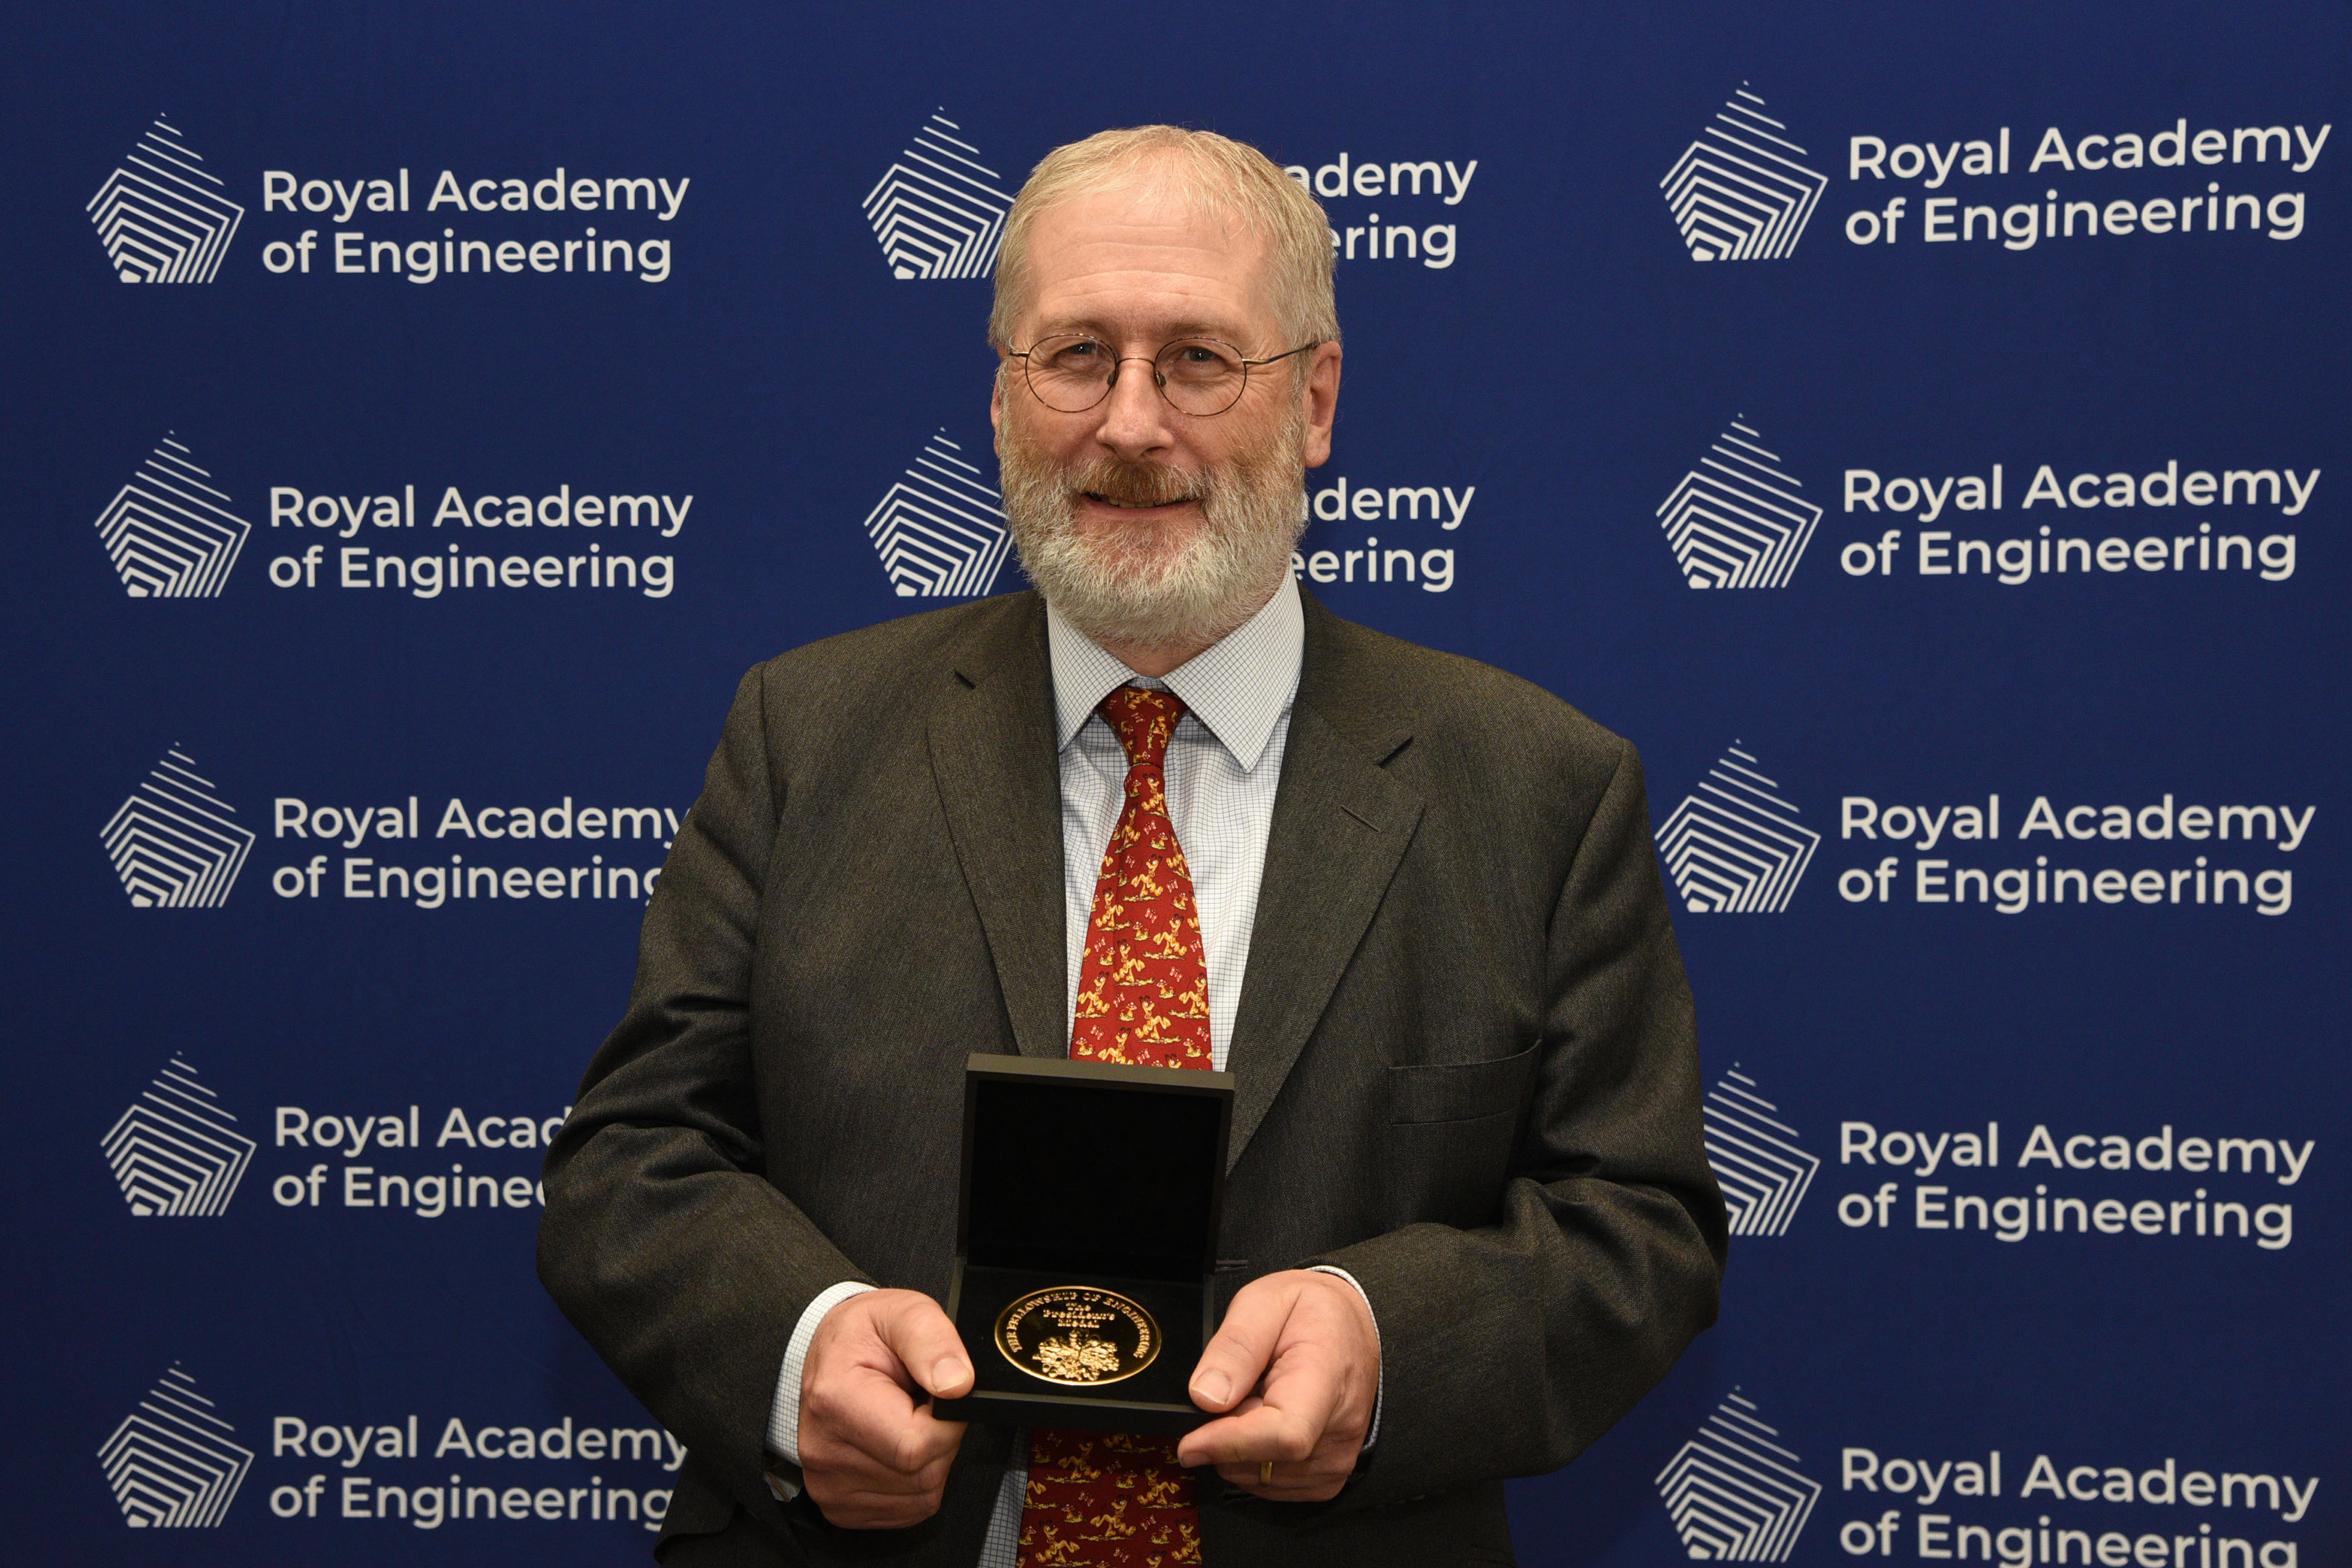 Professor John Clarkson FREng holding his President's Medal in front of a blue screen with the Royal Academy of Engineering logo